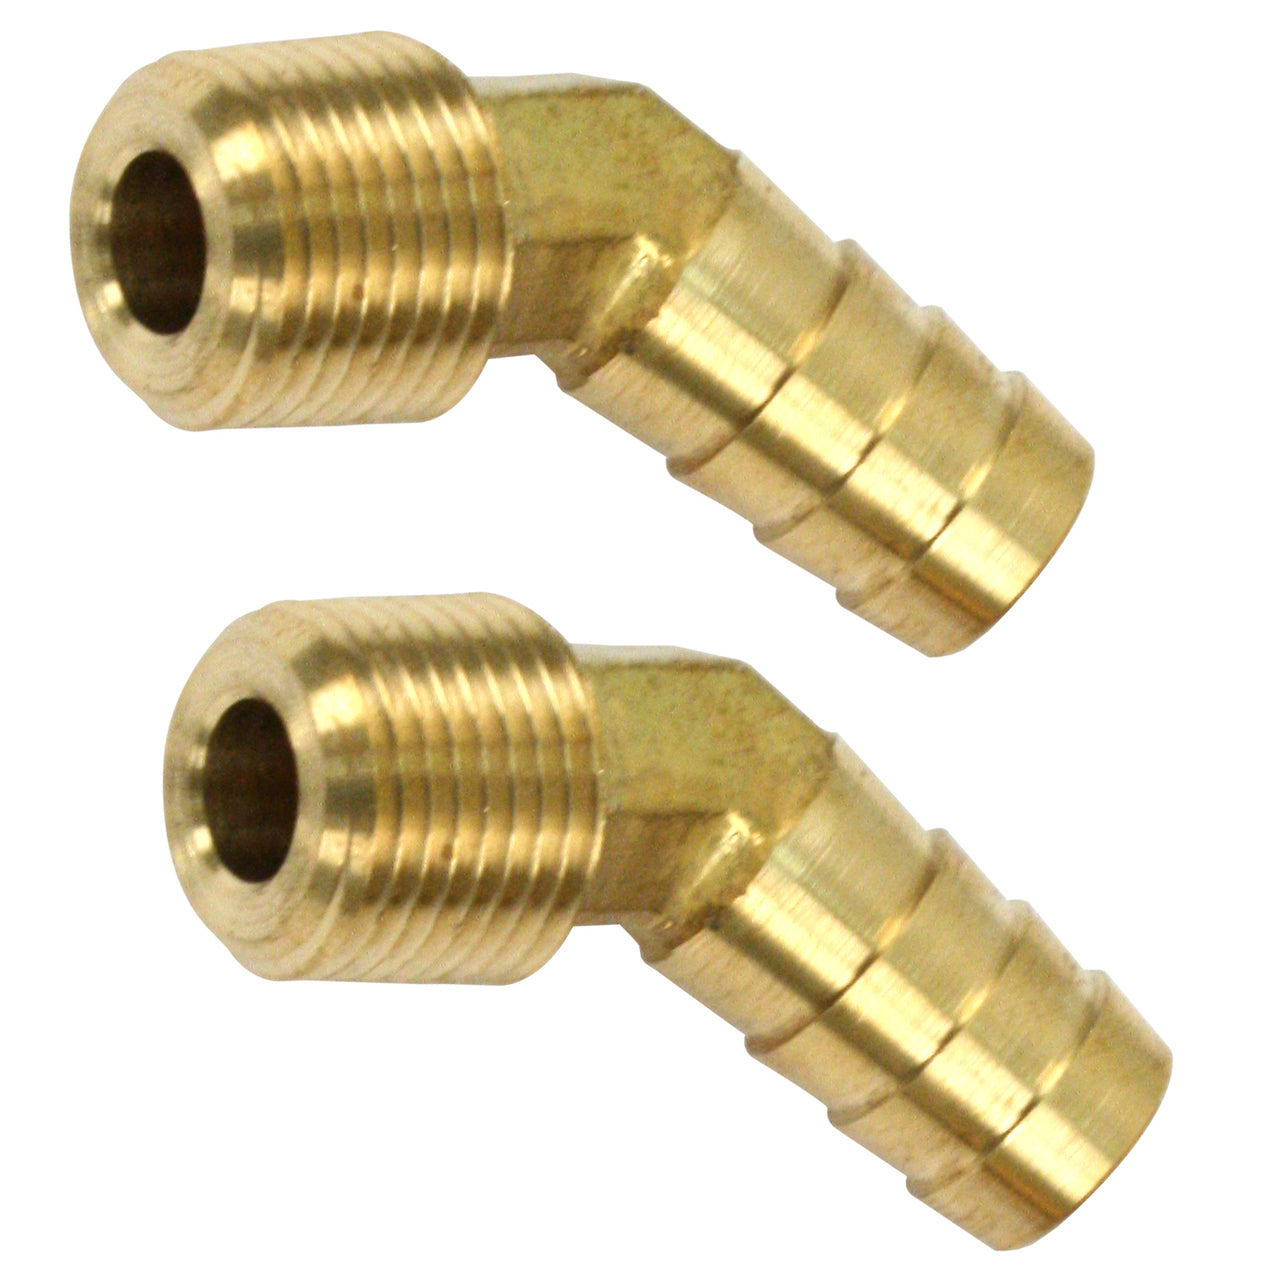 BRASS FITTINGS 30 DEGREE, MALE 3/8" NPT X 1/2" BARBED, PAIR